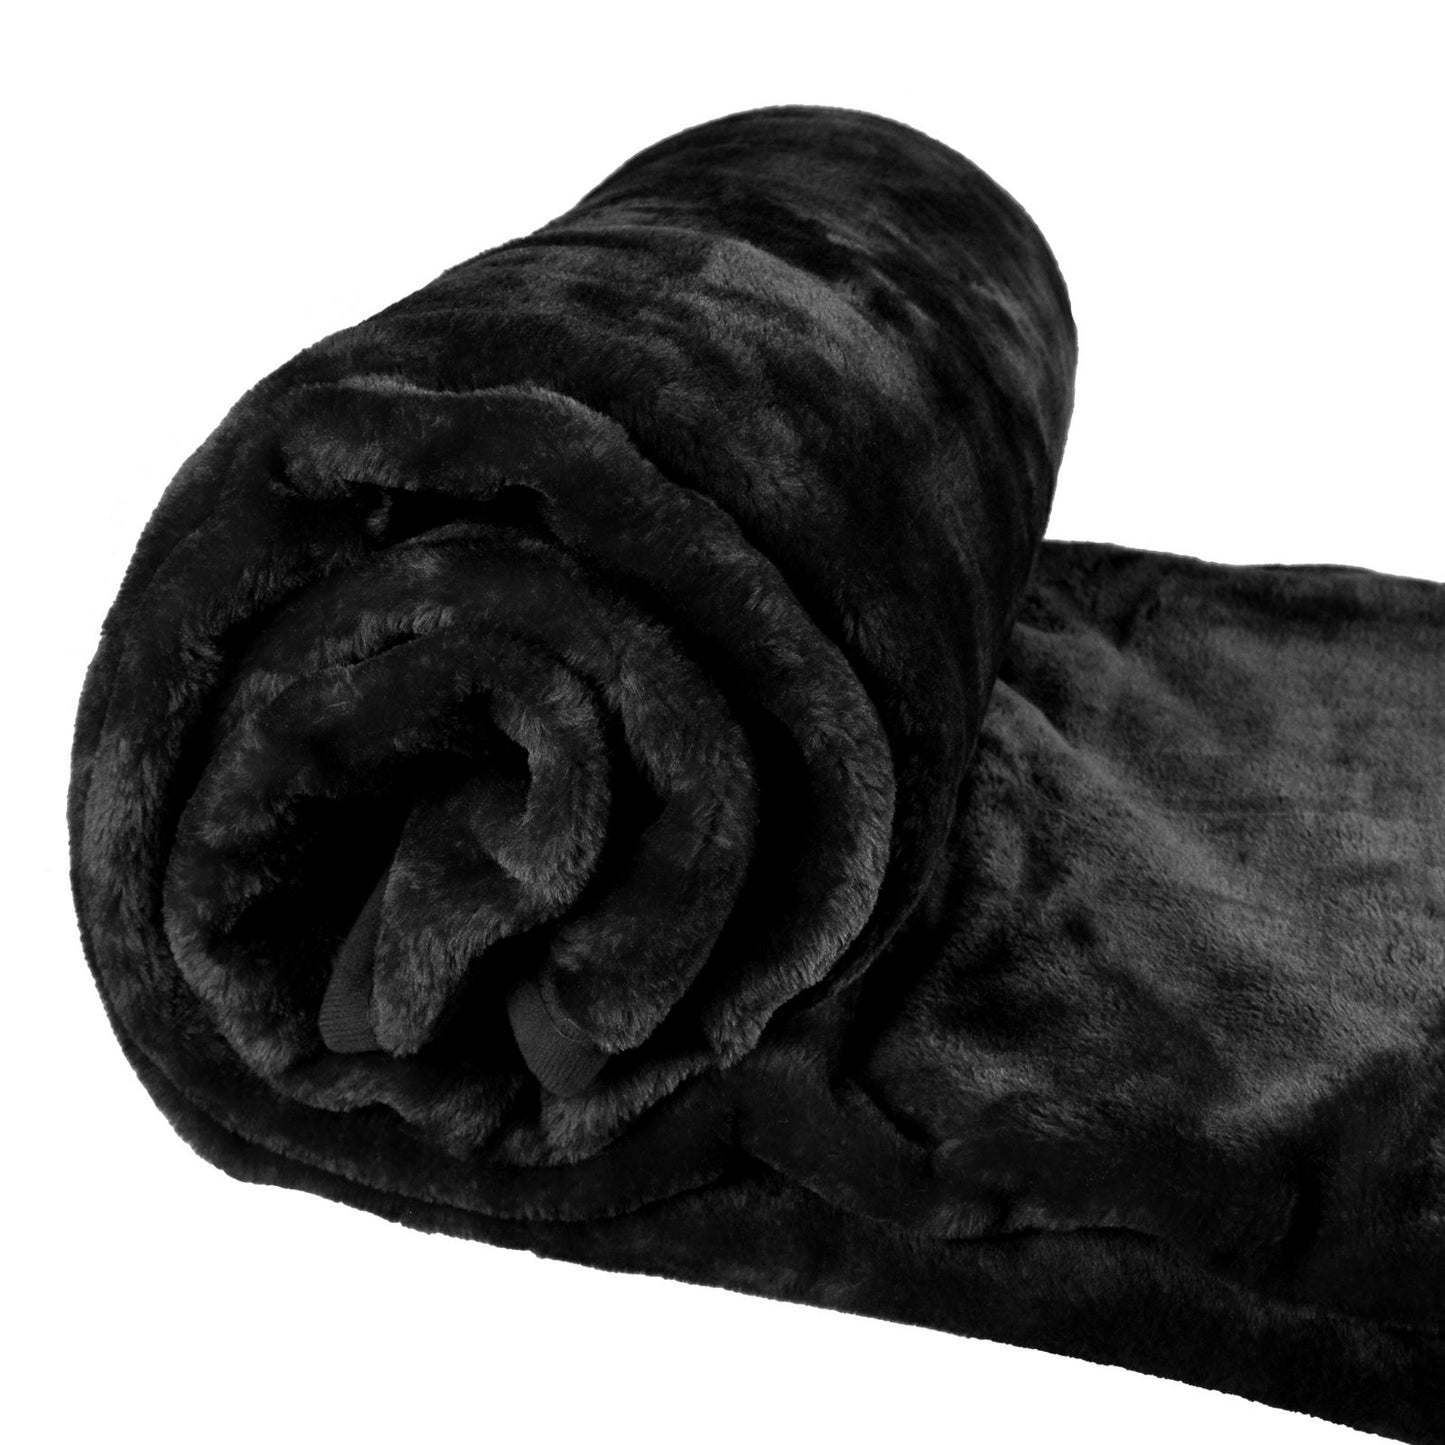 Snuggle Up with Faux Mink Throw Blanket 200 x 240 cm